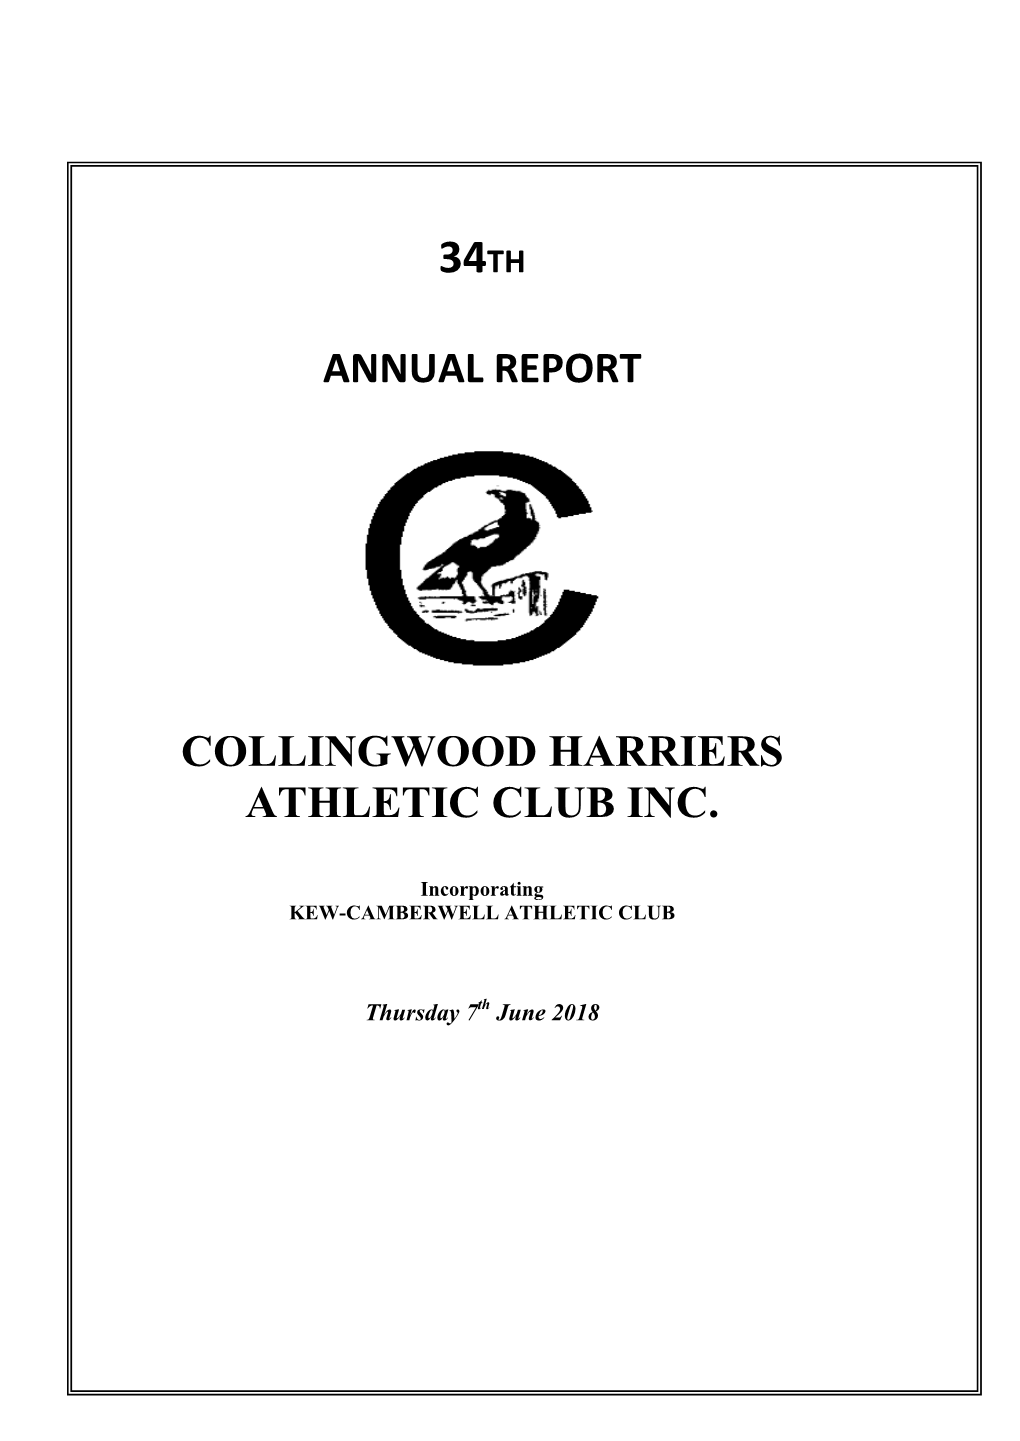 Annual Report Collingwood Harriers Athletic Club Inc